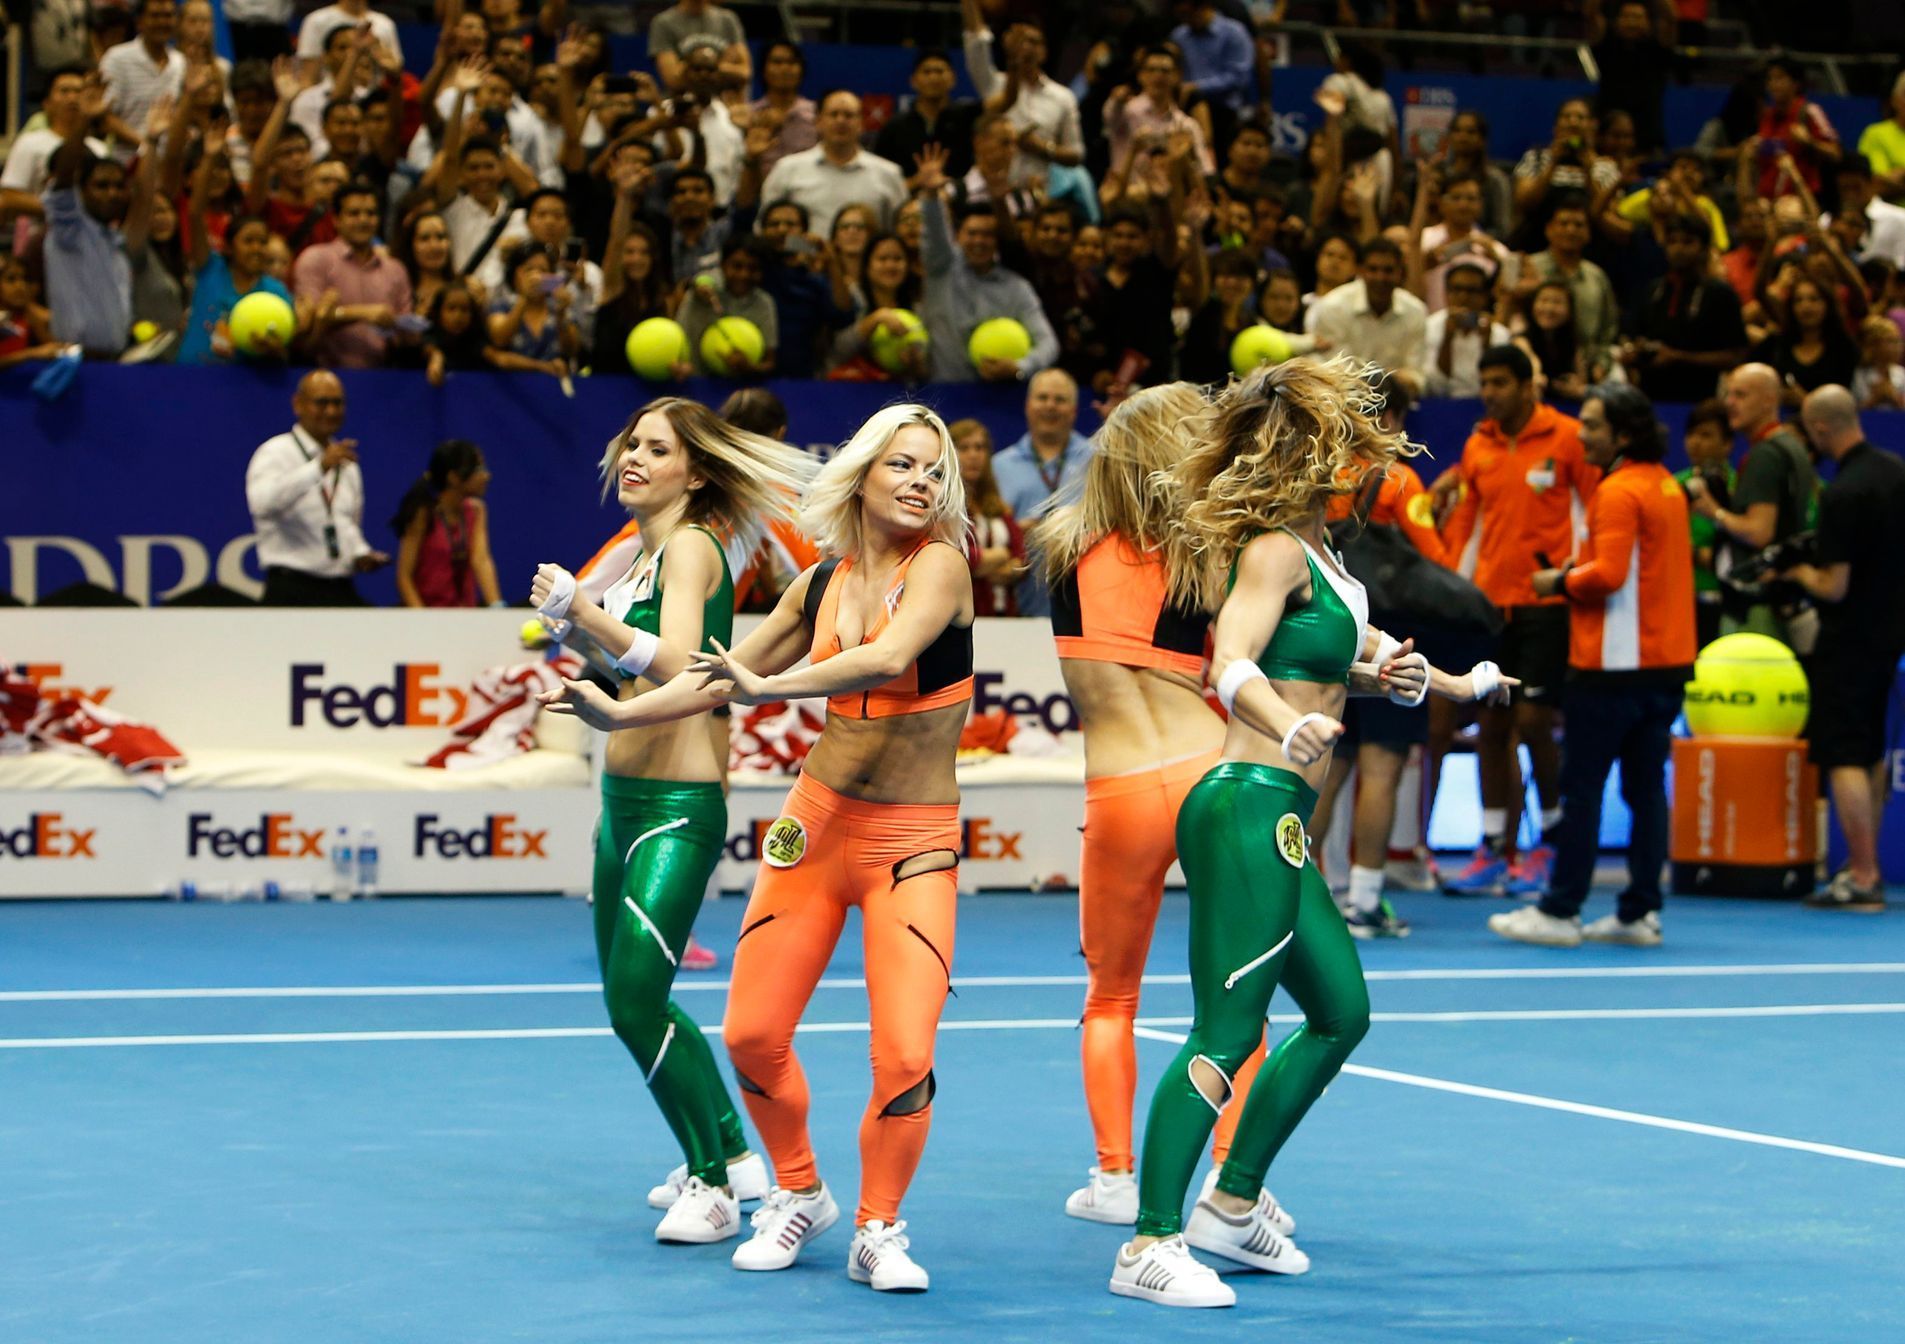 Dancers entertain the crowd after matches between Micromax Indian Aces and UAE Royals at the International Premier Tennis League (IPTL) in Singapore